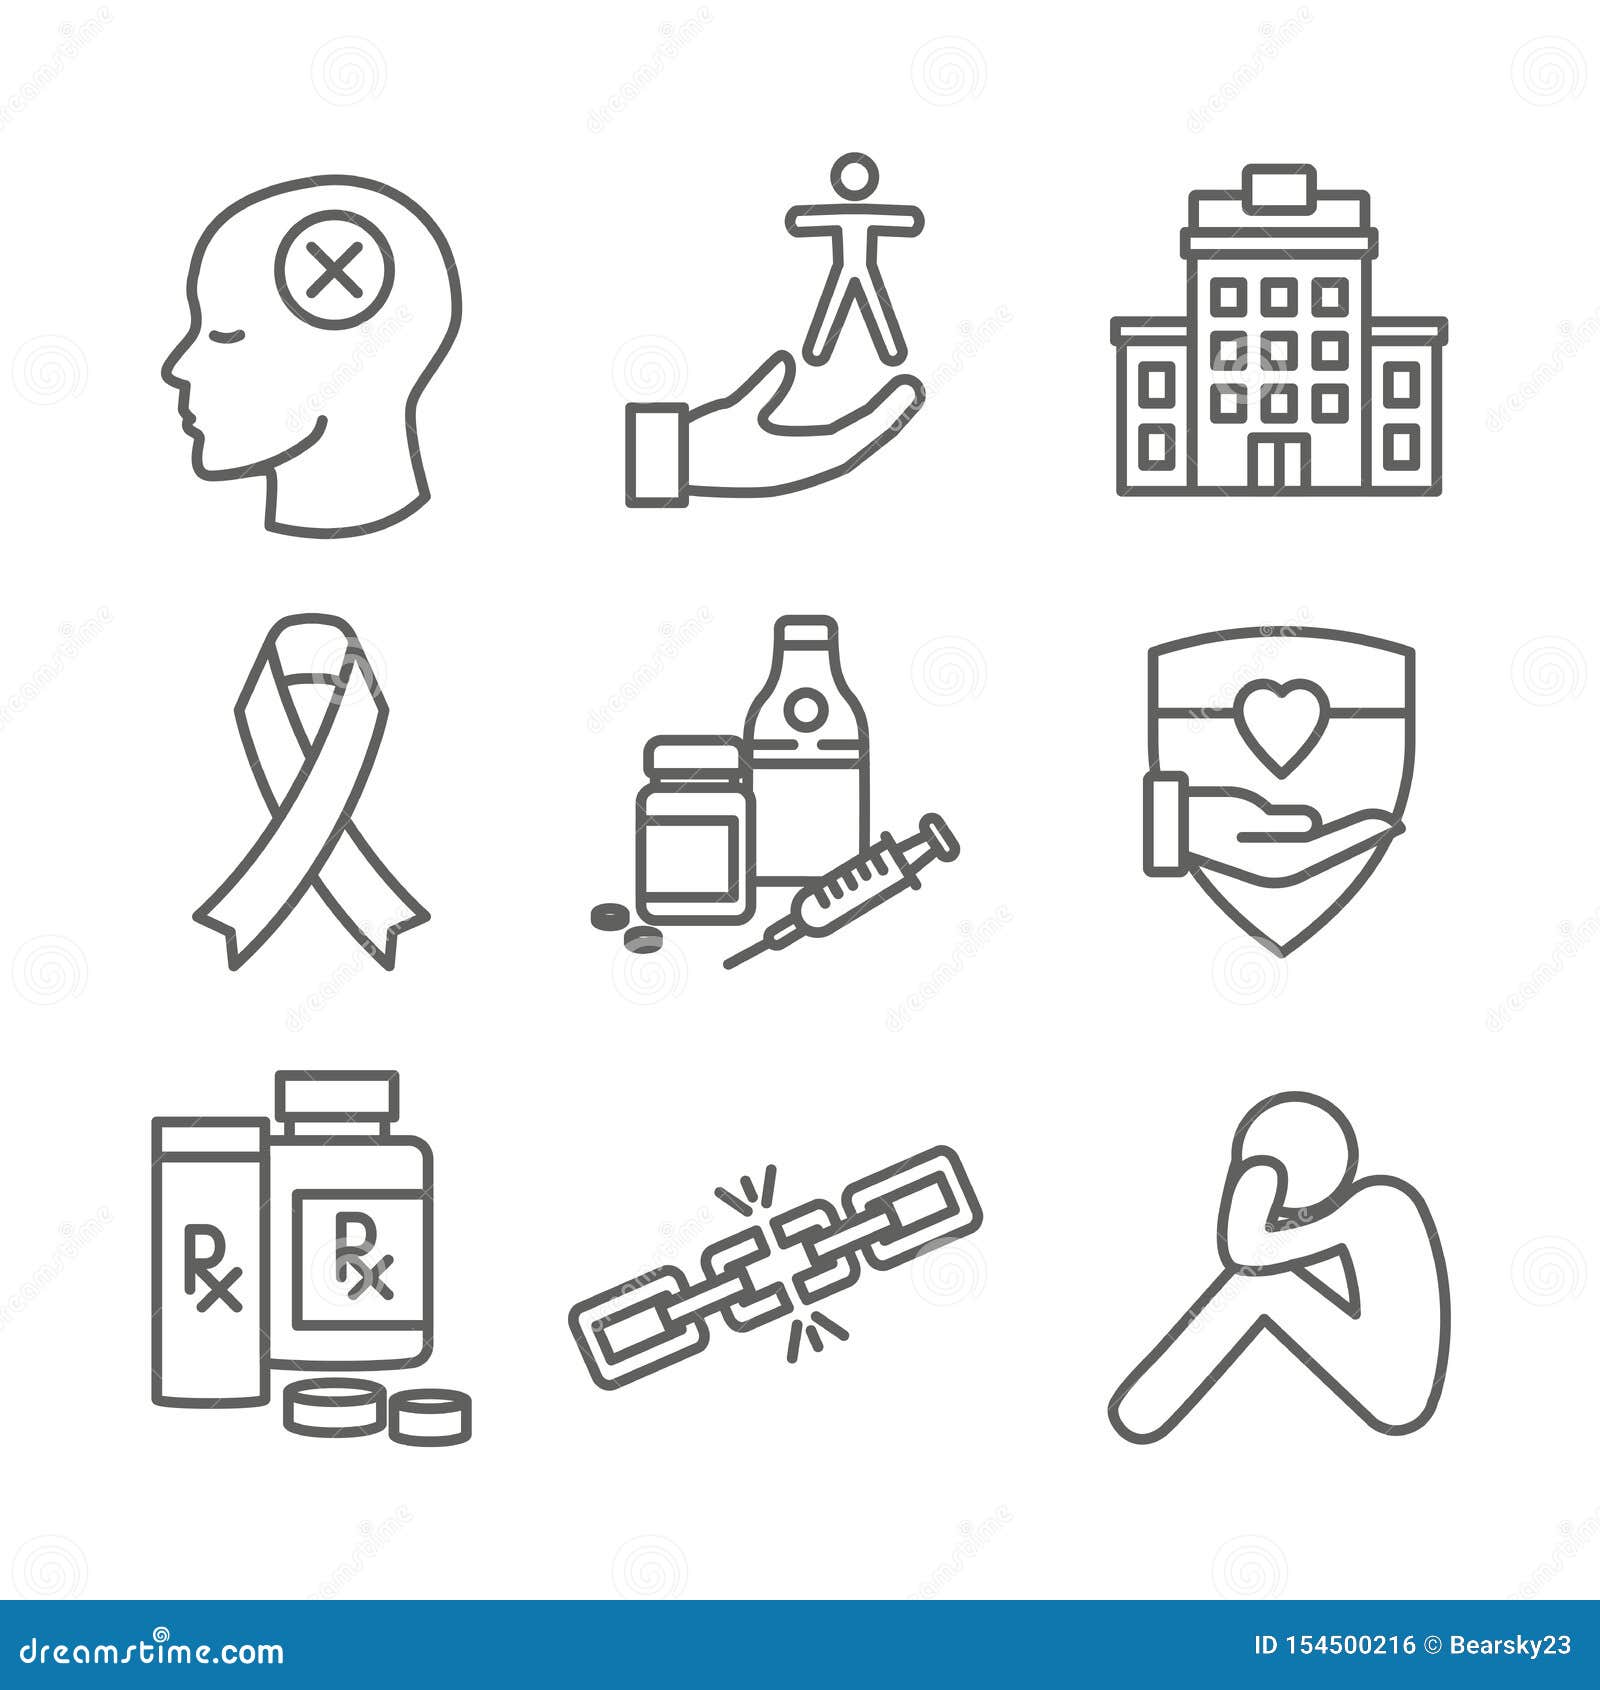 drug & alcohol dependency icon set - support, recovery, and treatment